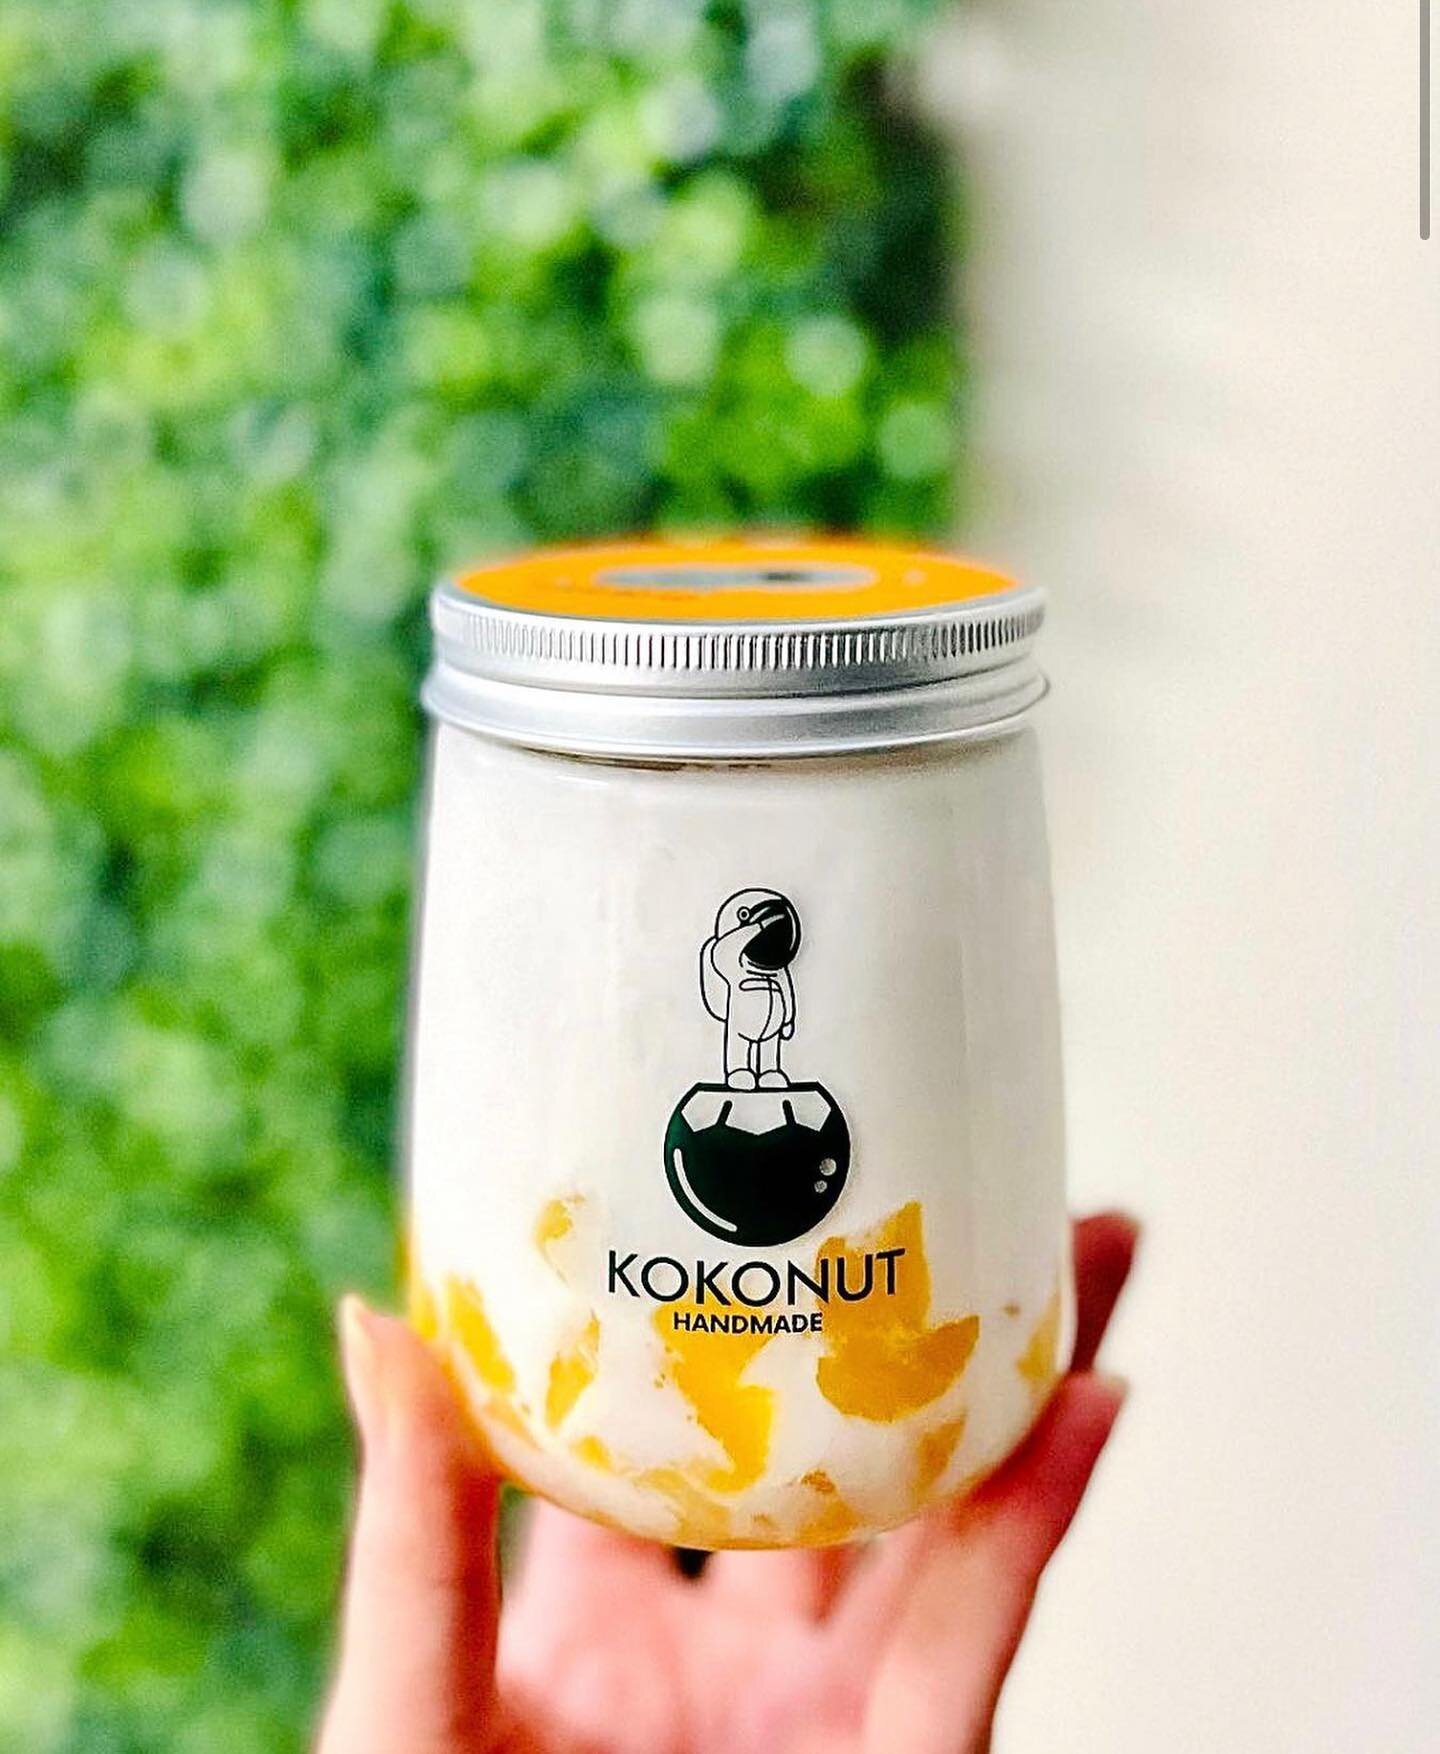 If you are looking for a healthier &amp; wholesome dessert with all the delicious flavor - @kokonutdessert is a MUST try. And their storefront is right here at The Hood! ⭐️🥥

📷 : @kokonutdessert

#kokonutdessert #thehoodkitchen #commercialkitchen #